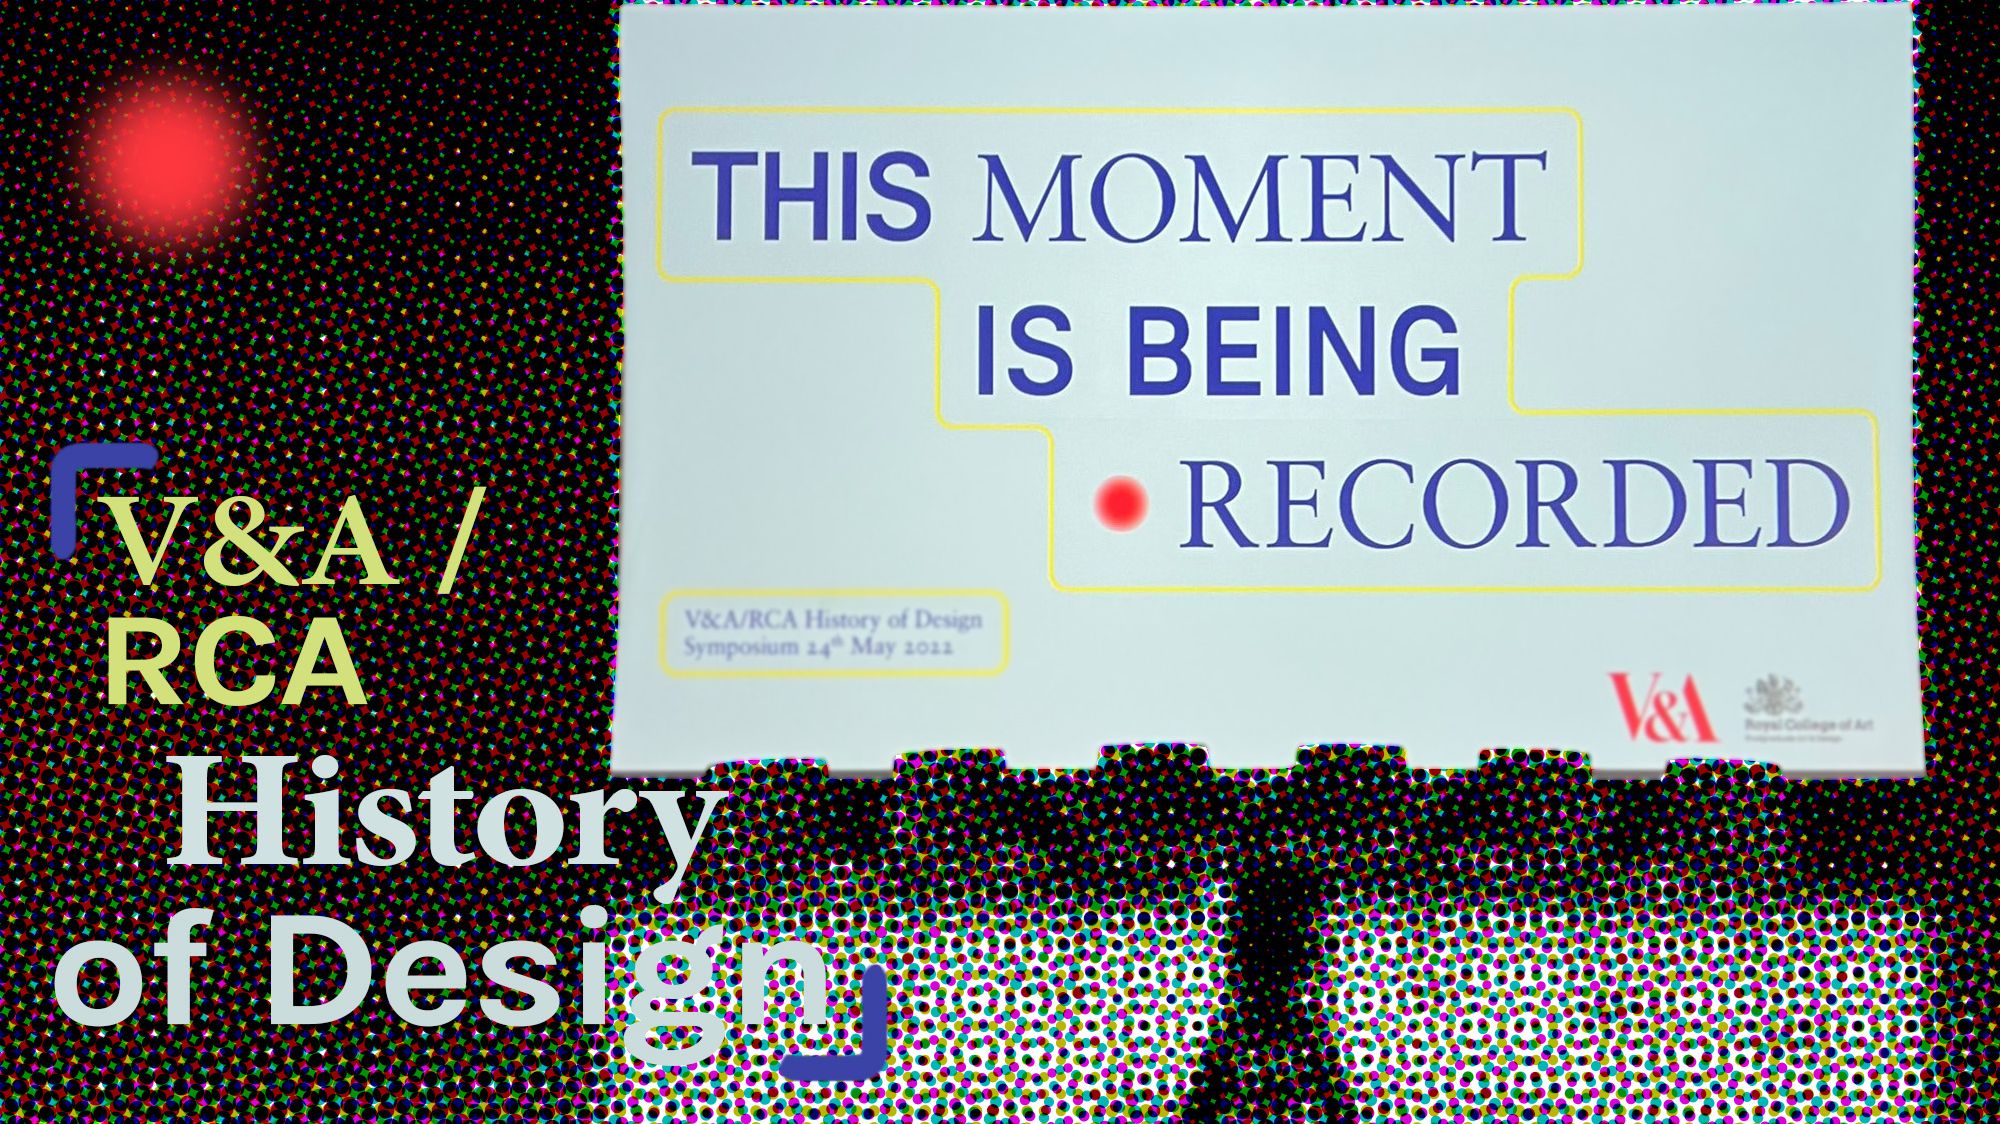 A poster with a background of a pixelated cctv-style image of empty chairs in a row with text reading 'This Moment Is Being Recorded' and 'V&A / RCA. History of Design.'